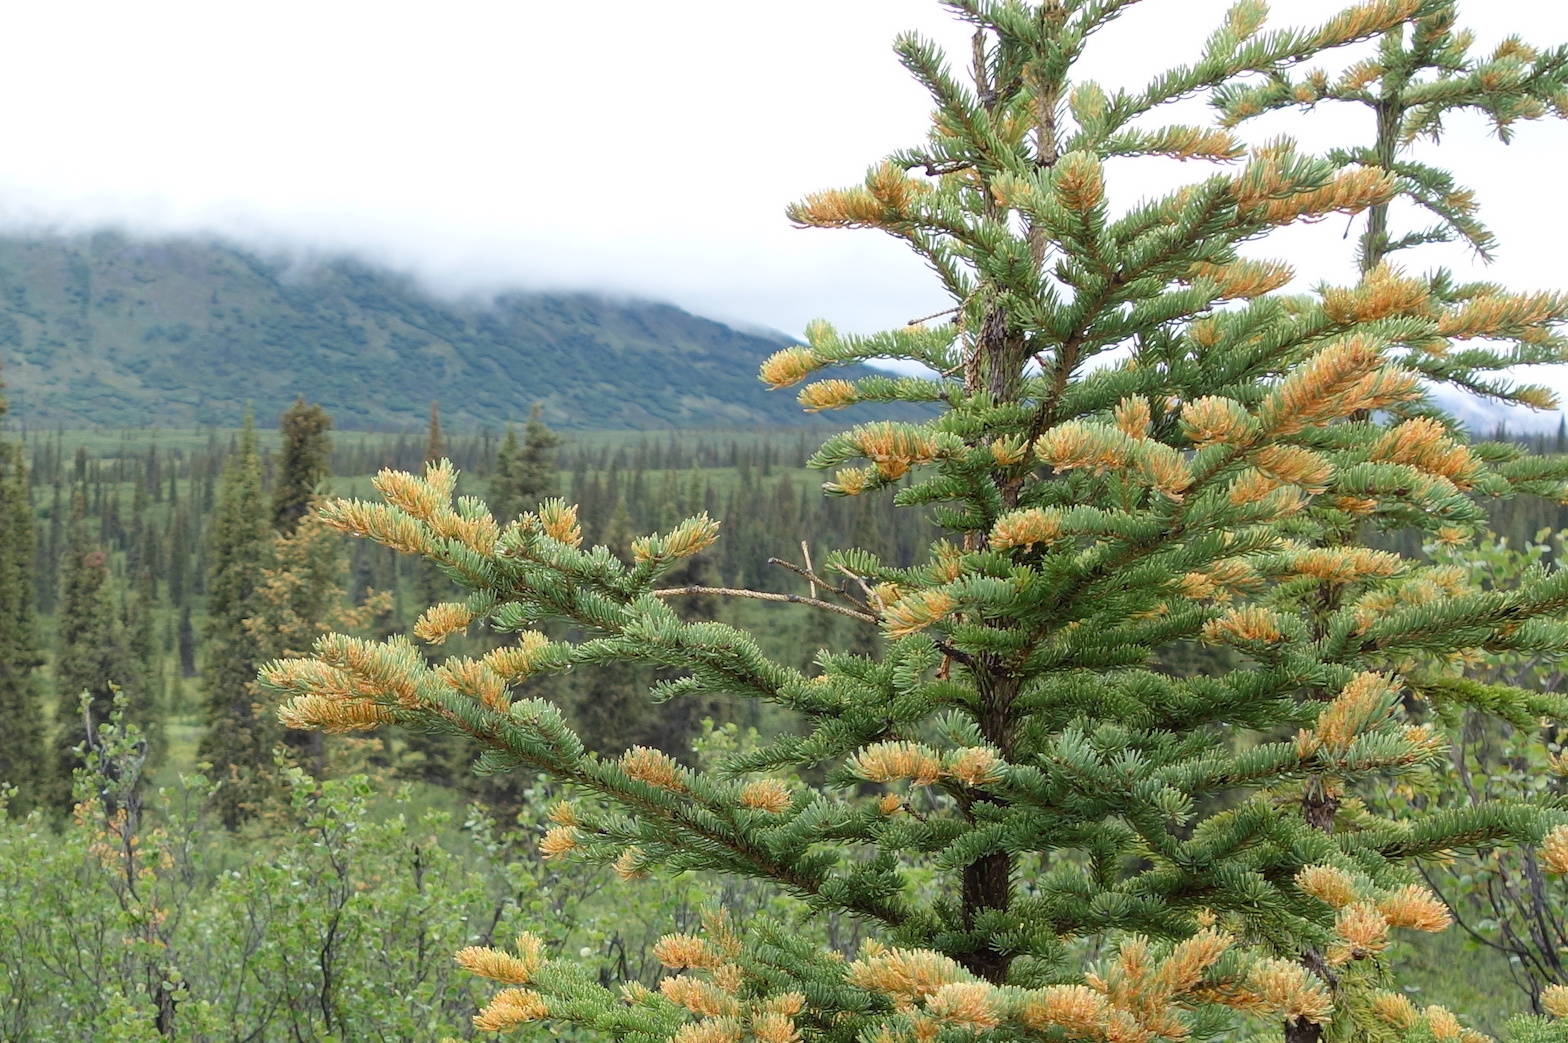 The cause of orange trees in the Alaska Range may surprise you